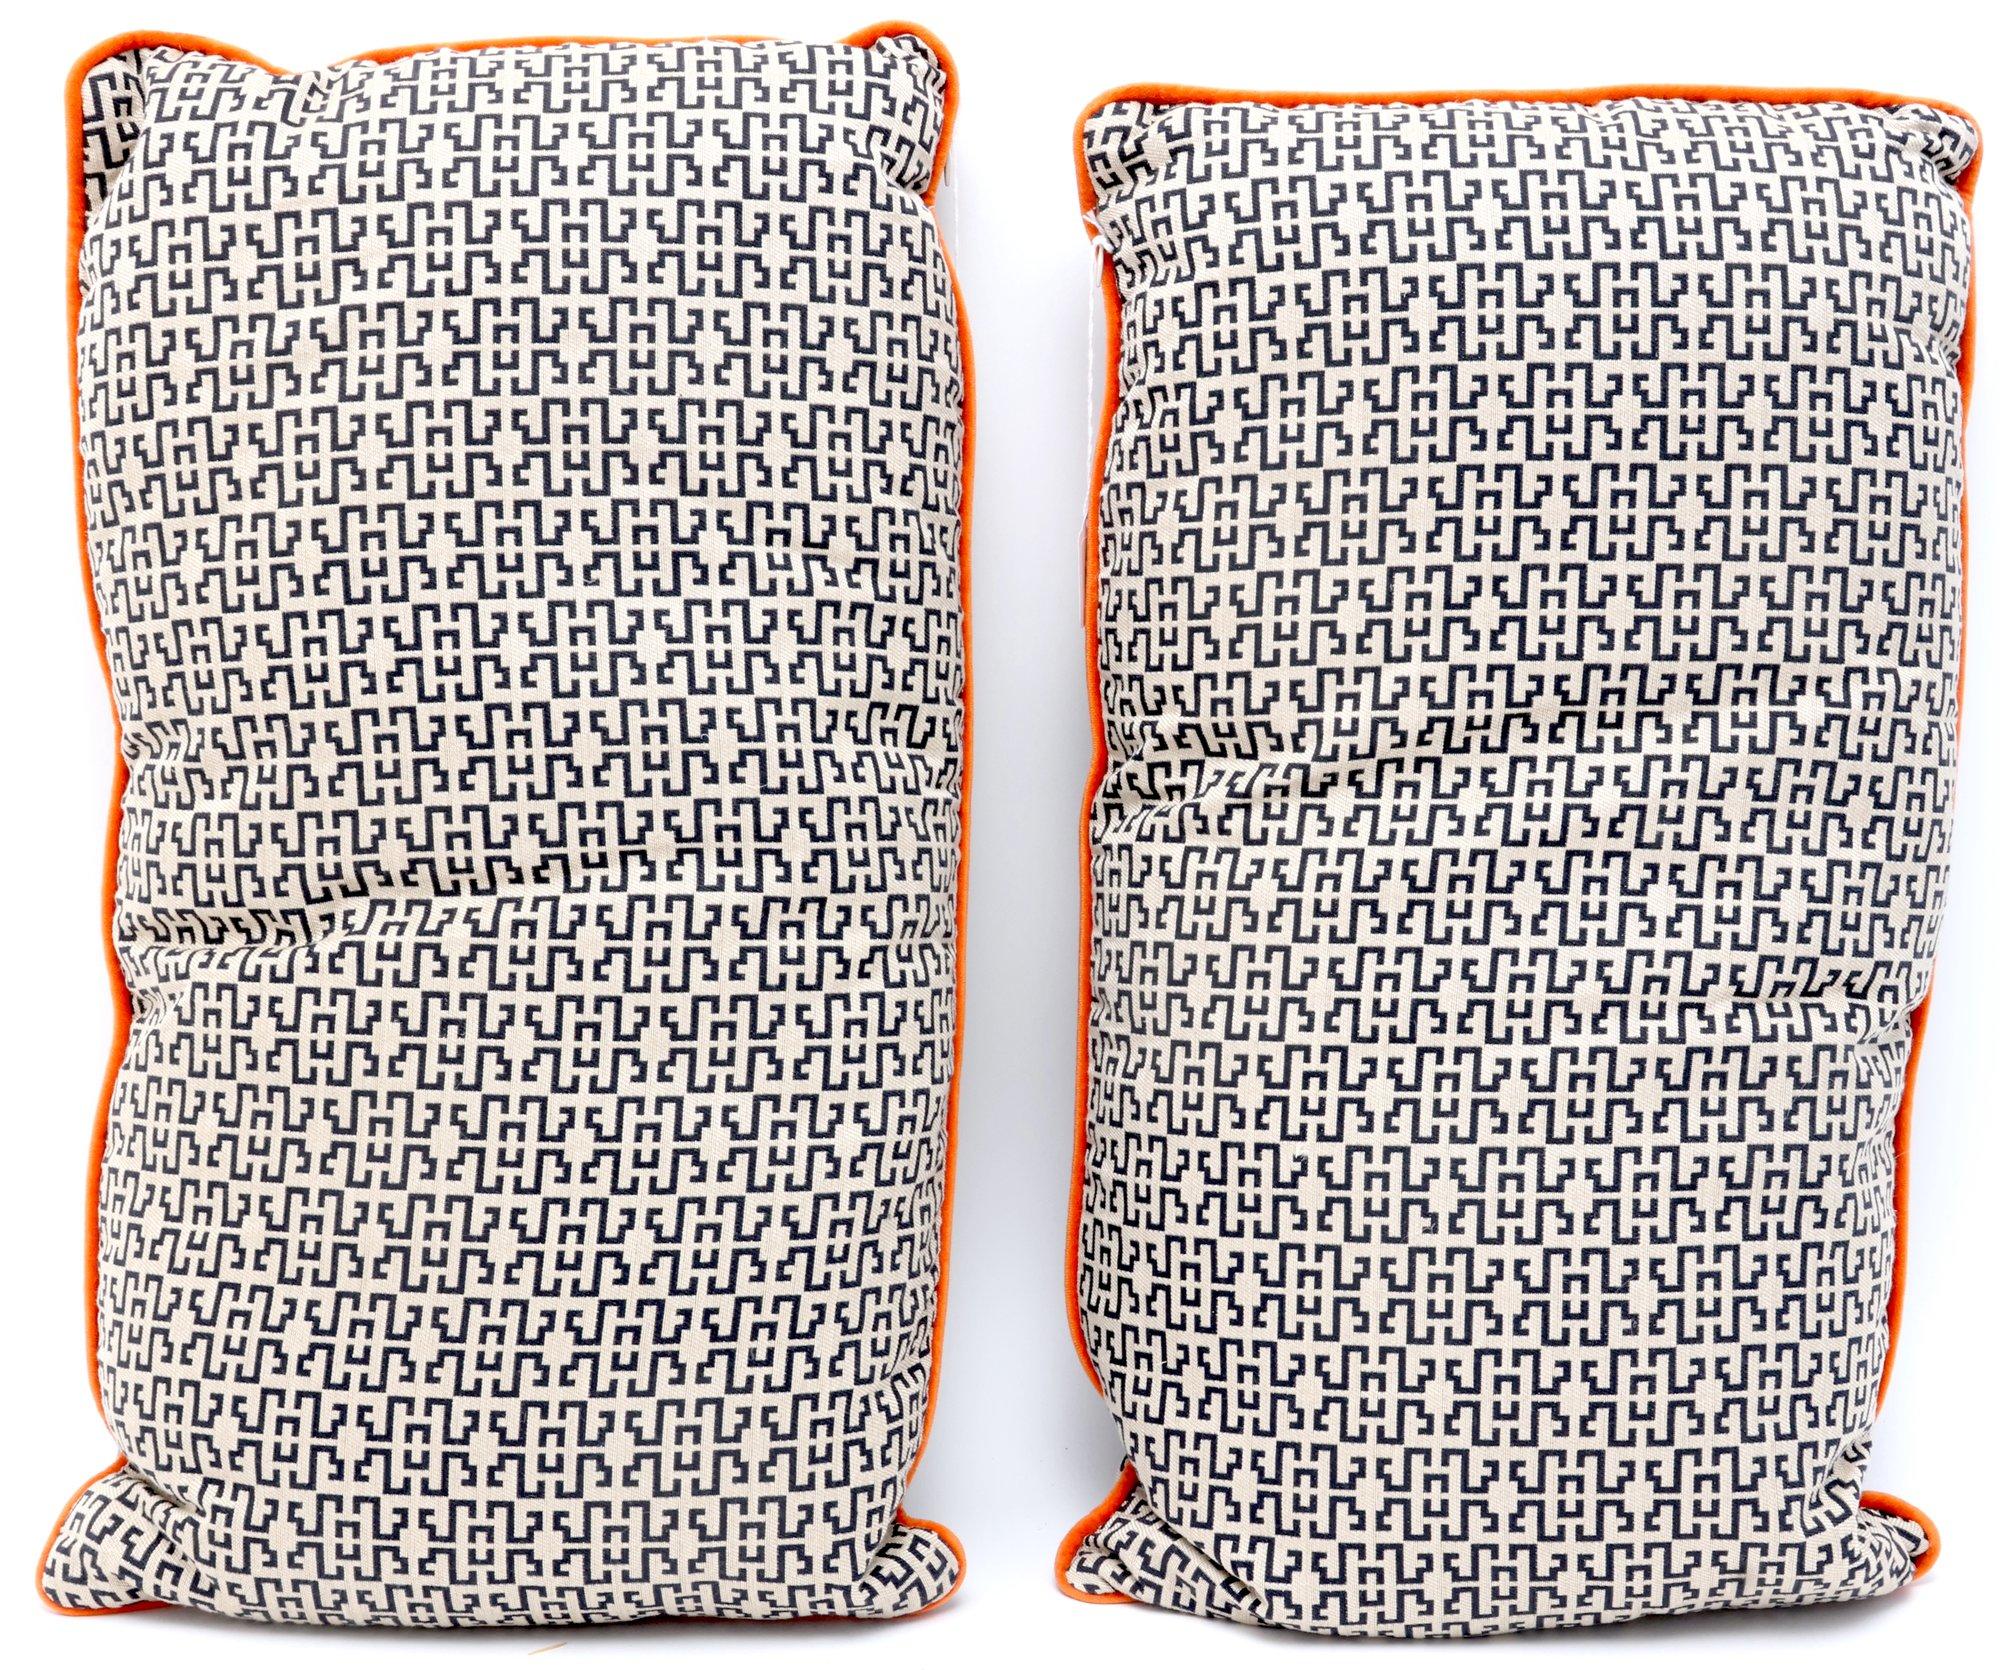 Square Feathers White And Black Pillows With Orange Trim